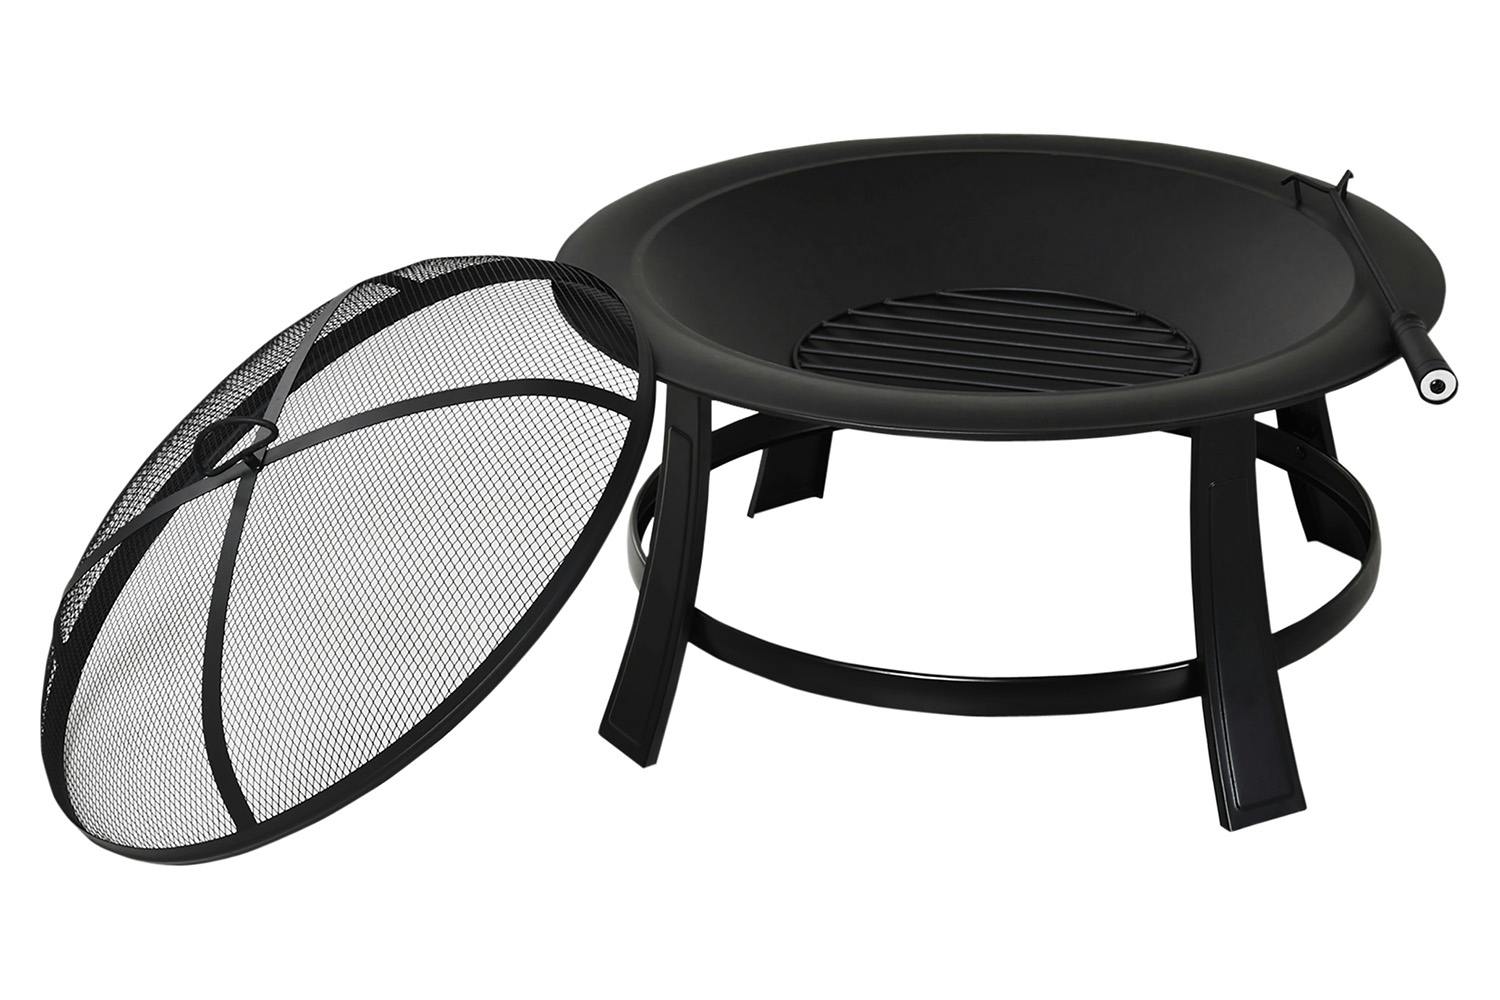 Outsunny Outdoor Round Metal Fire Pit with Poker Wood Grate | Black